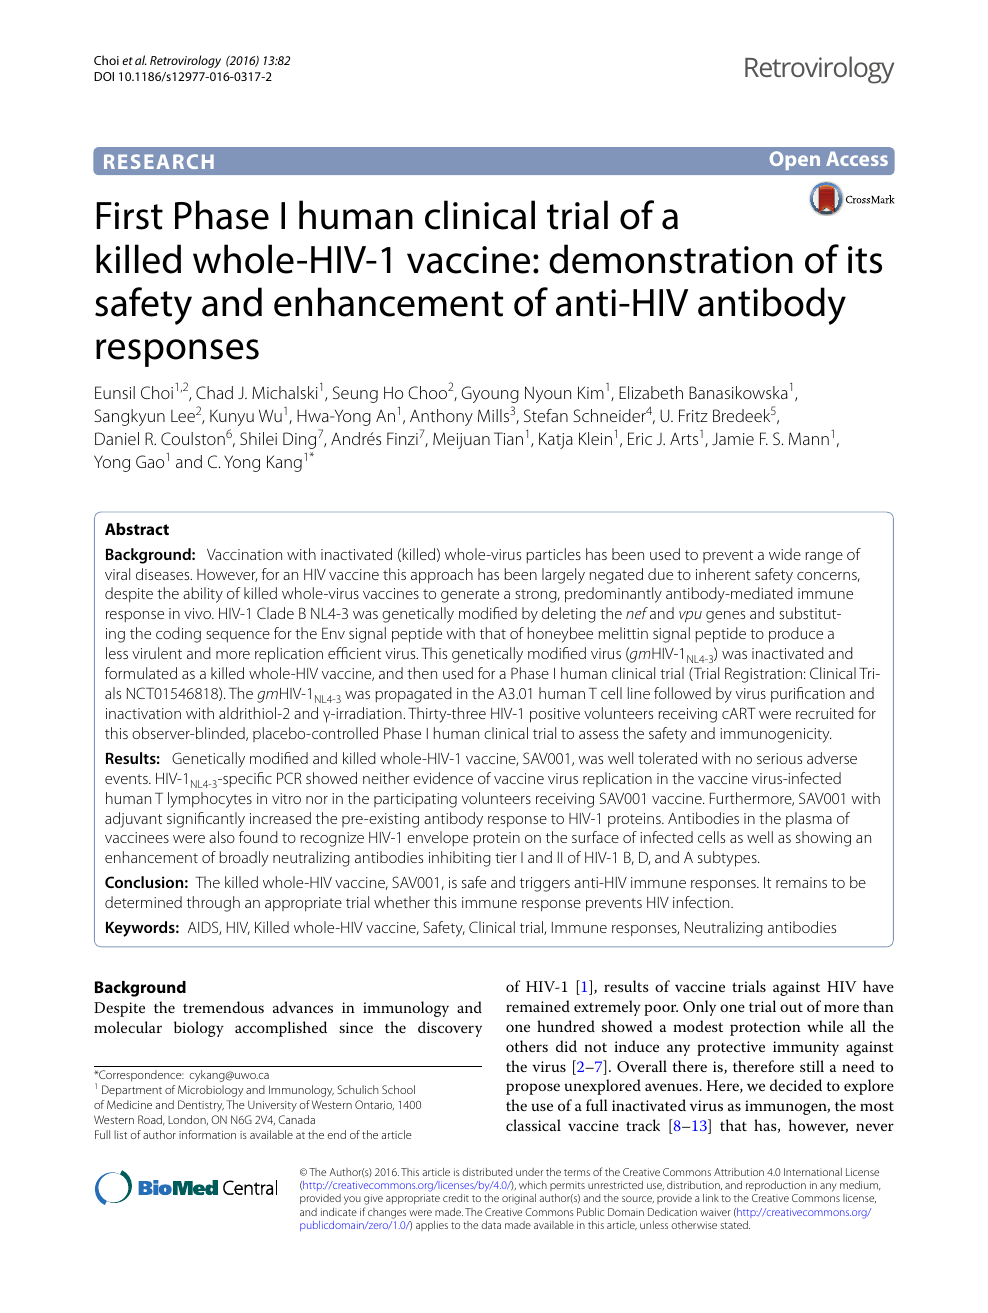 First Phase I Human Clinical Trial Of A Killed Whole Hiv 1 Vaccine Demonstration Of Its Safety And Enhancement Of Anti Hiv Antibody Responses Topic Of Research Paper In Veterinary Science Download Scholarly Article